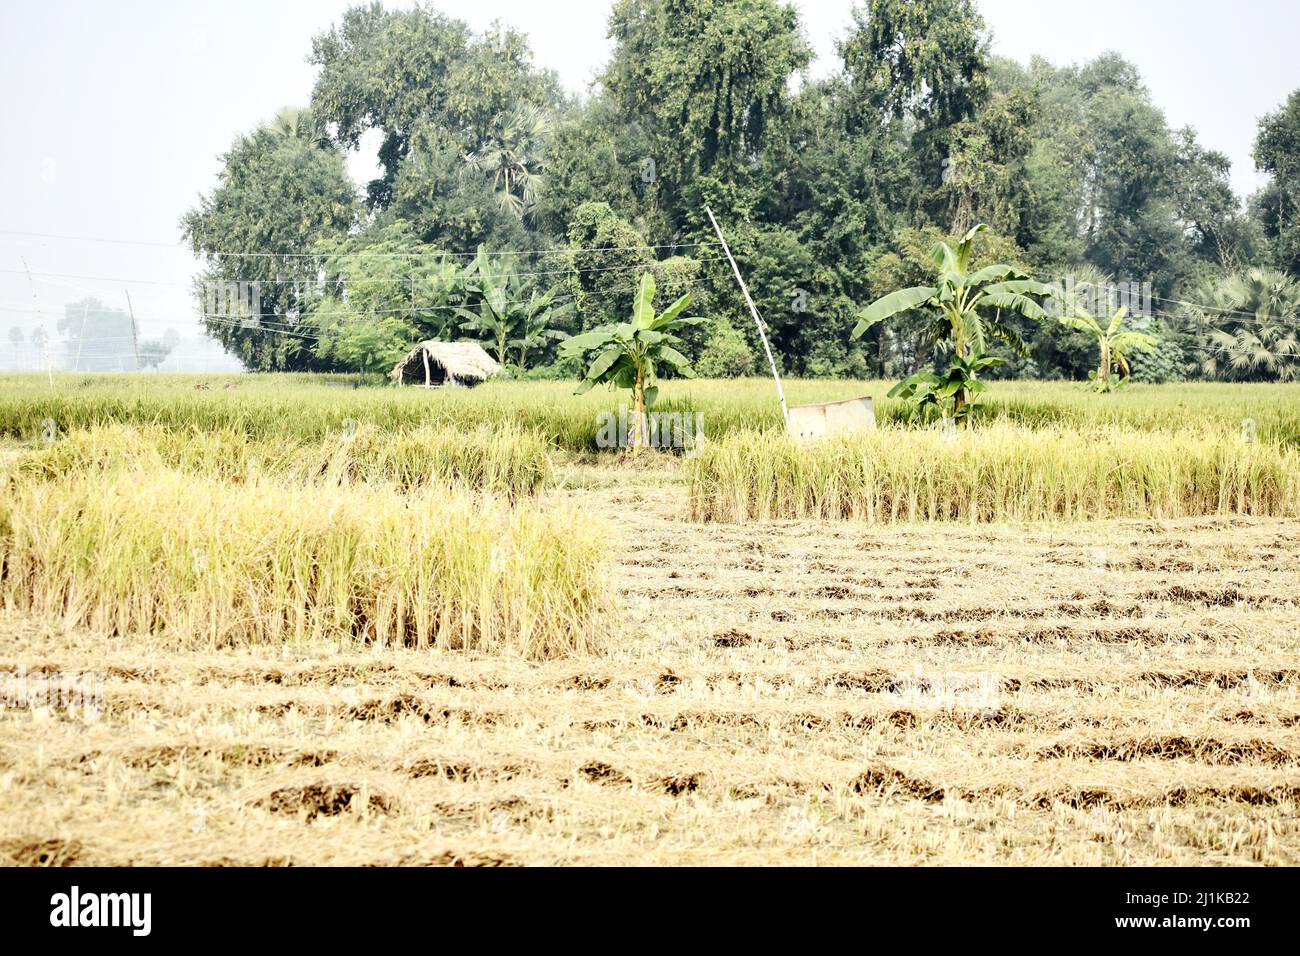 CULTIVATION OF RICE - PADDY Stock Photo